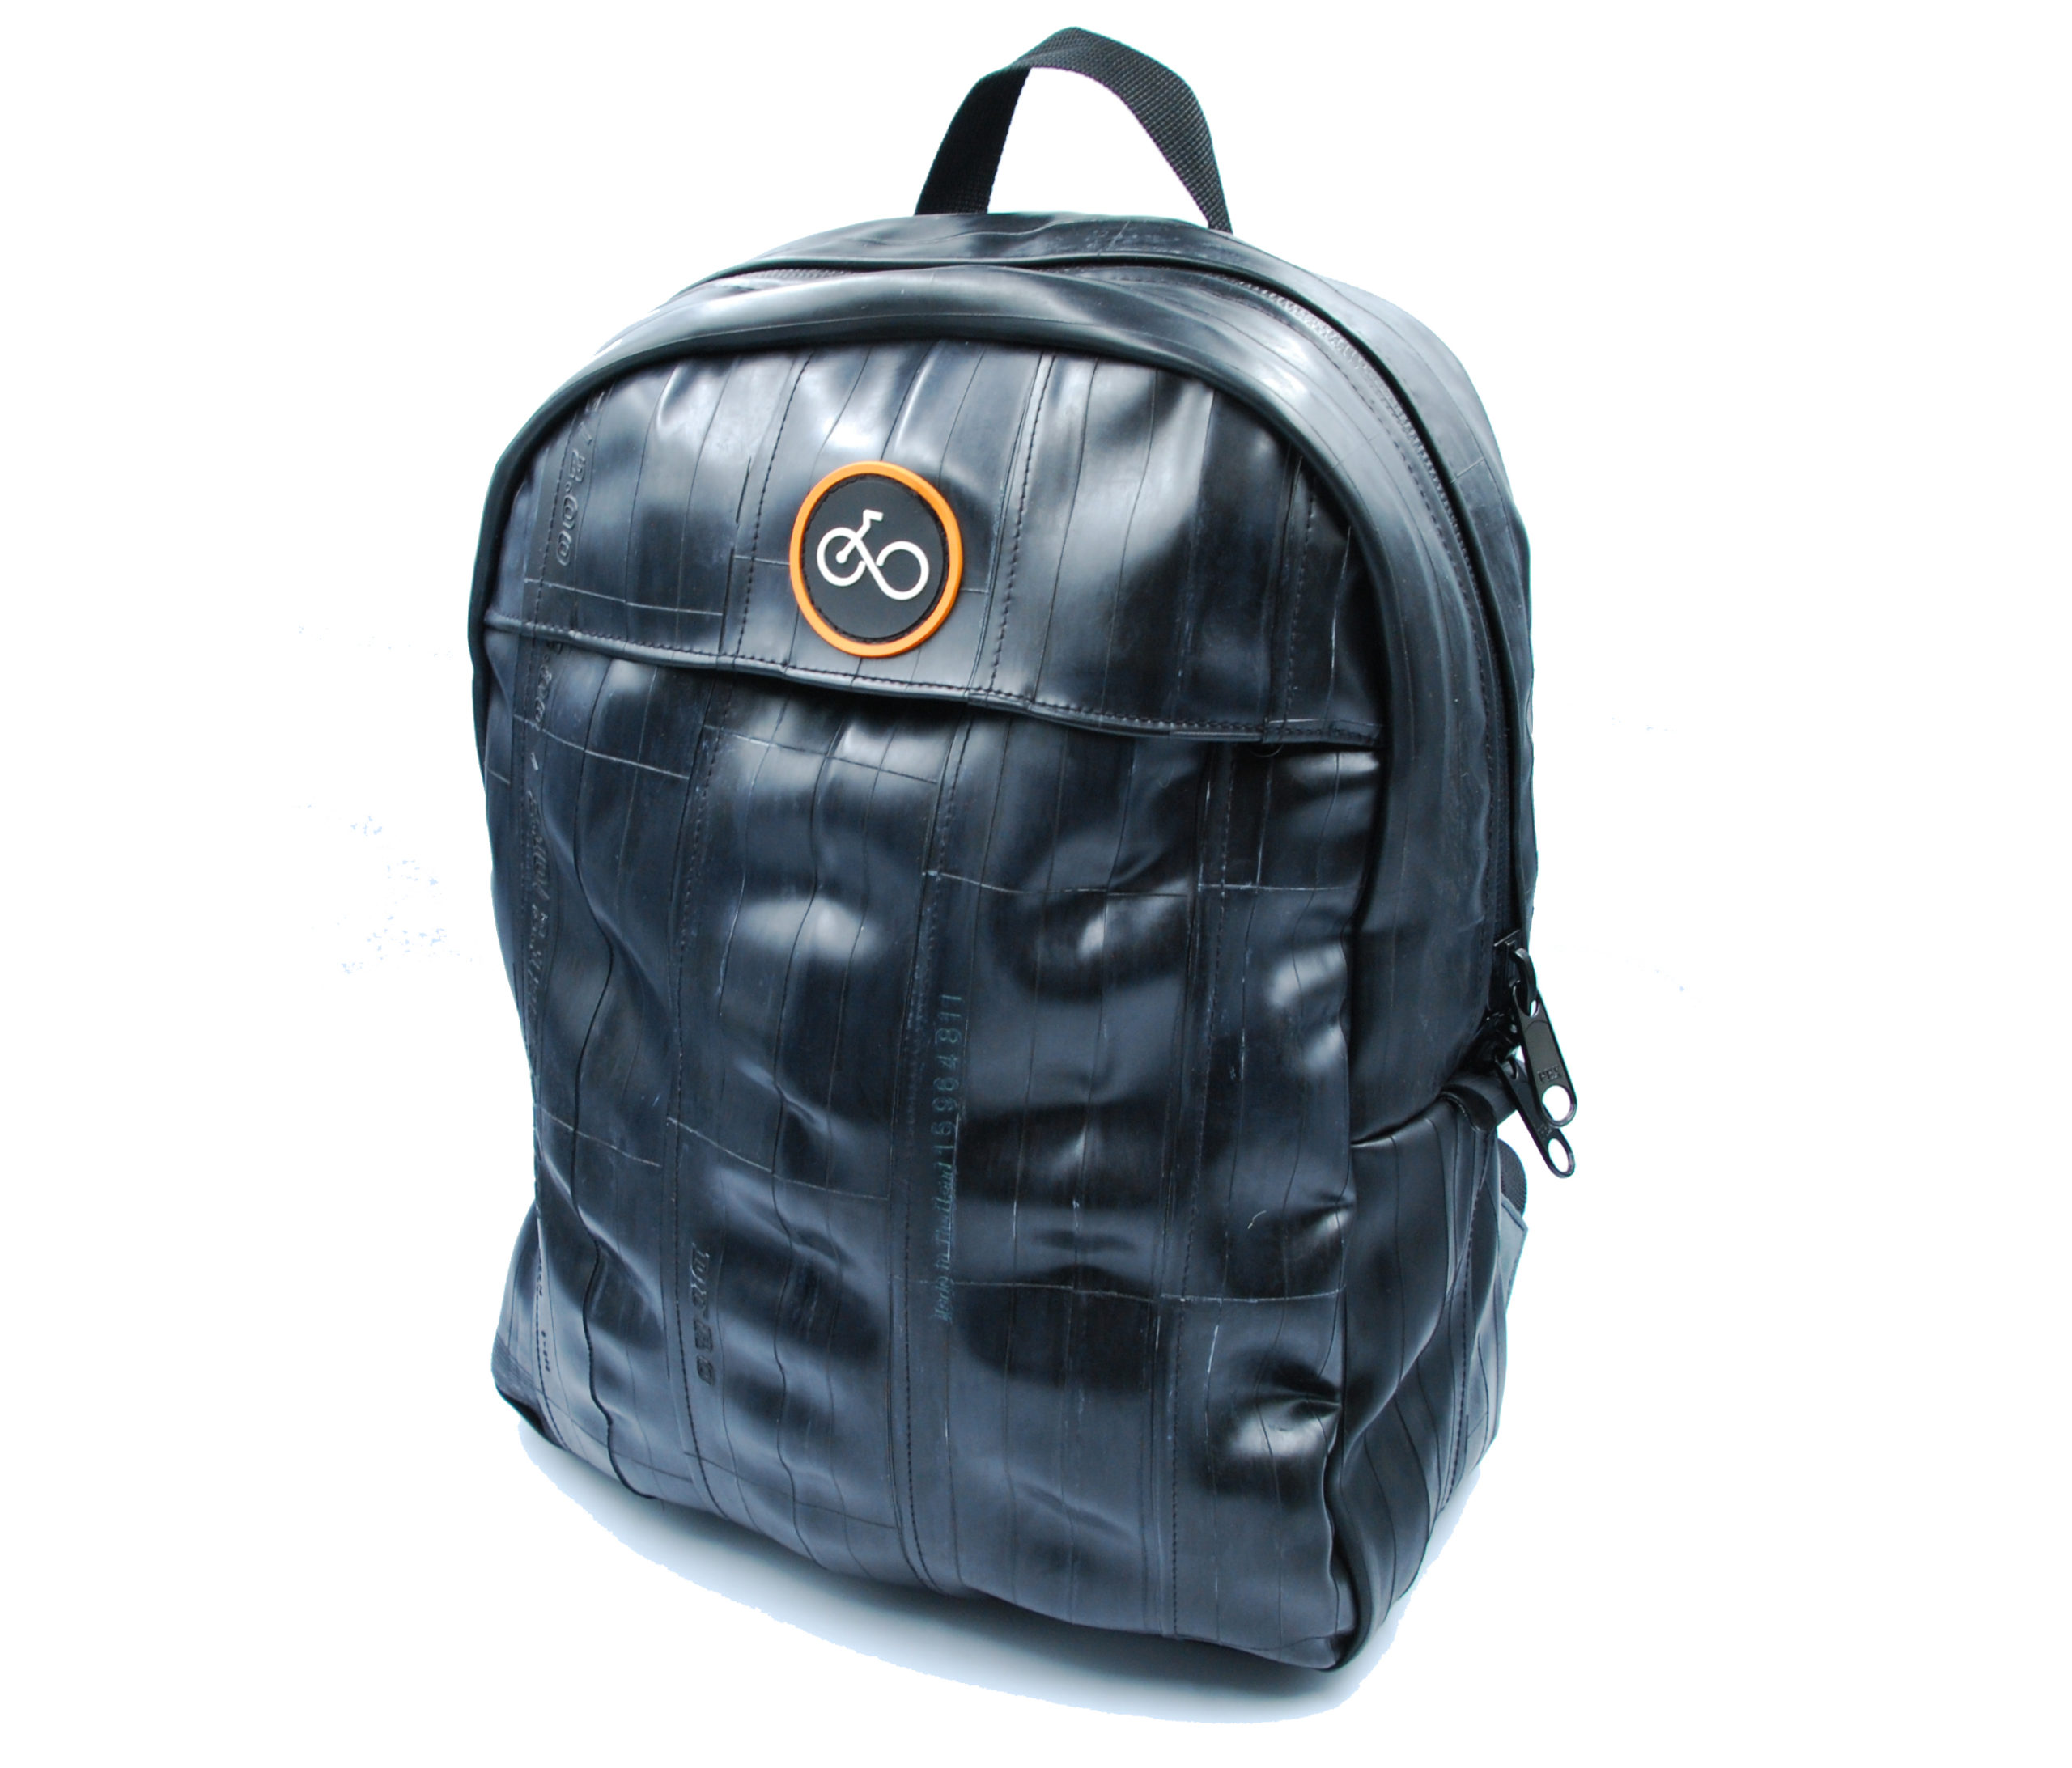 Recycled Inner Tube Rucksack By Carradice - Cycle Of Good